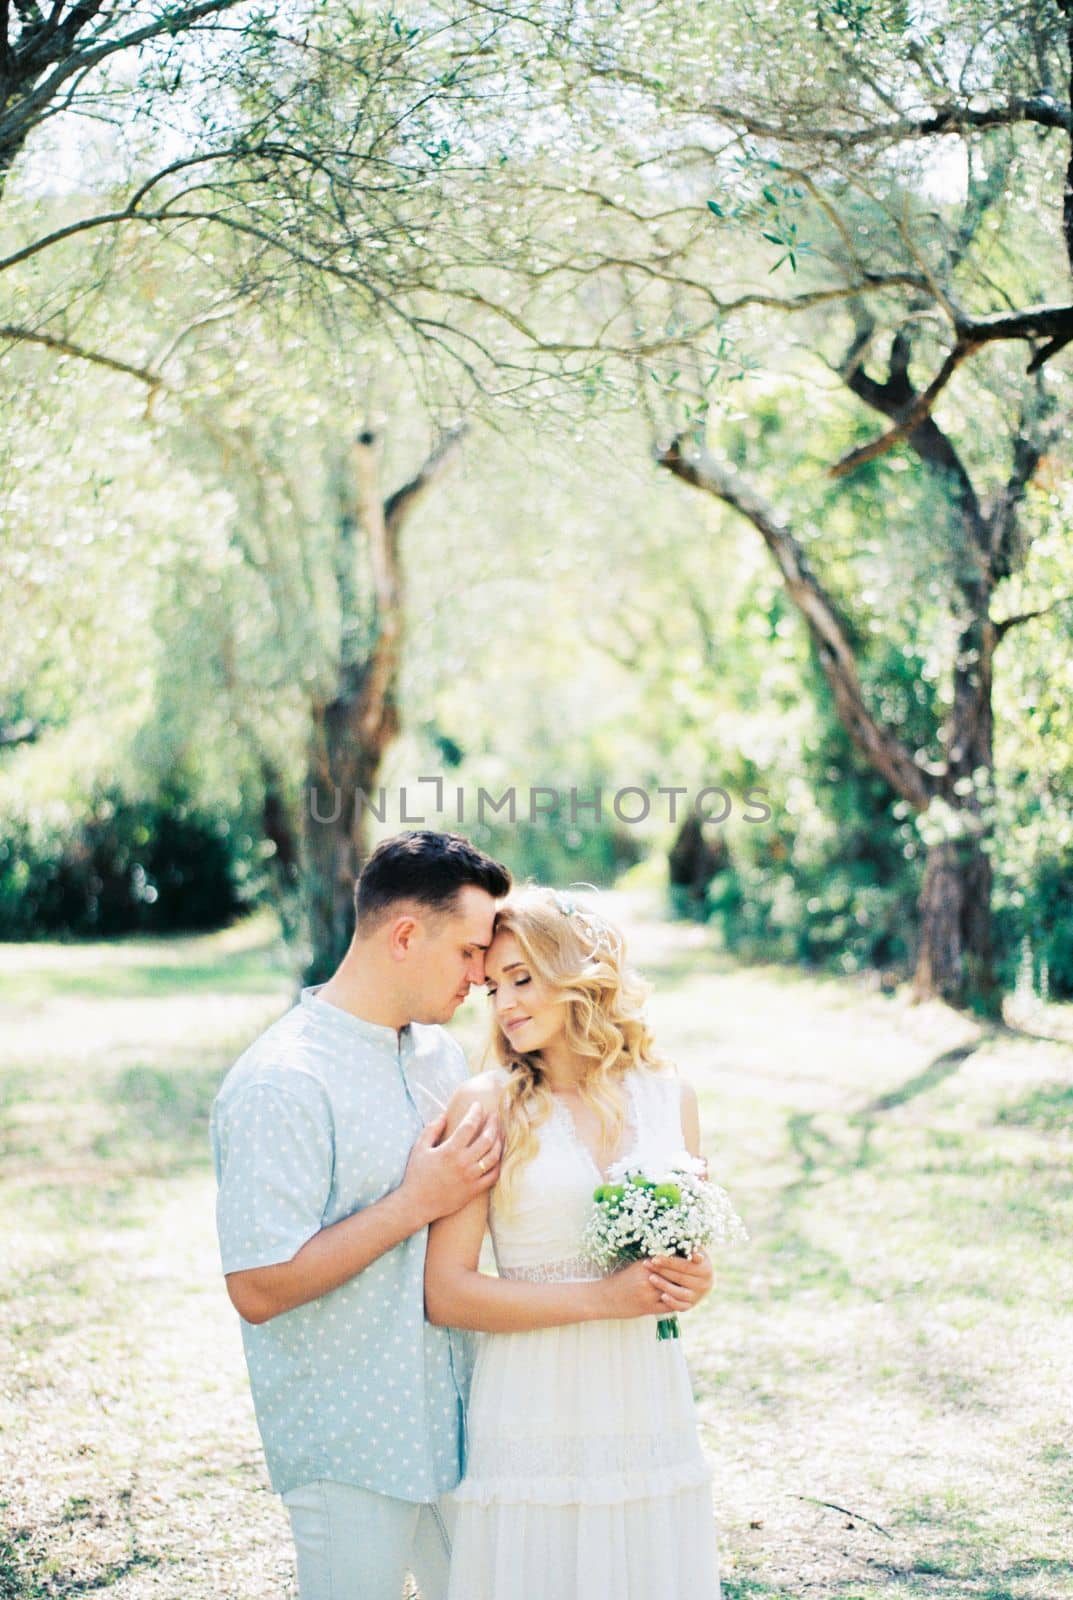 Groom hugs bride from behind with a bouquet of flowers in the park. High quality photo